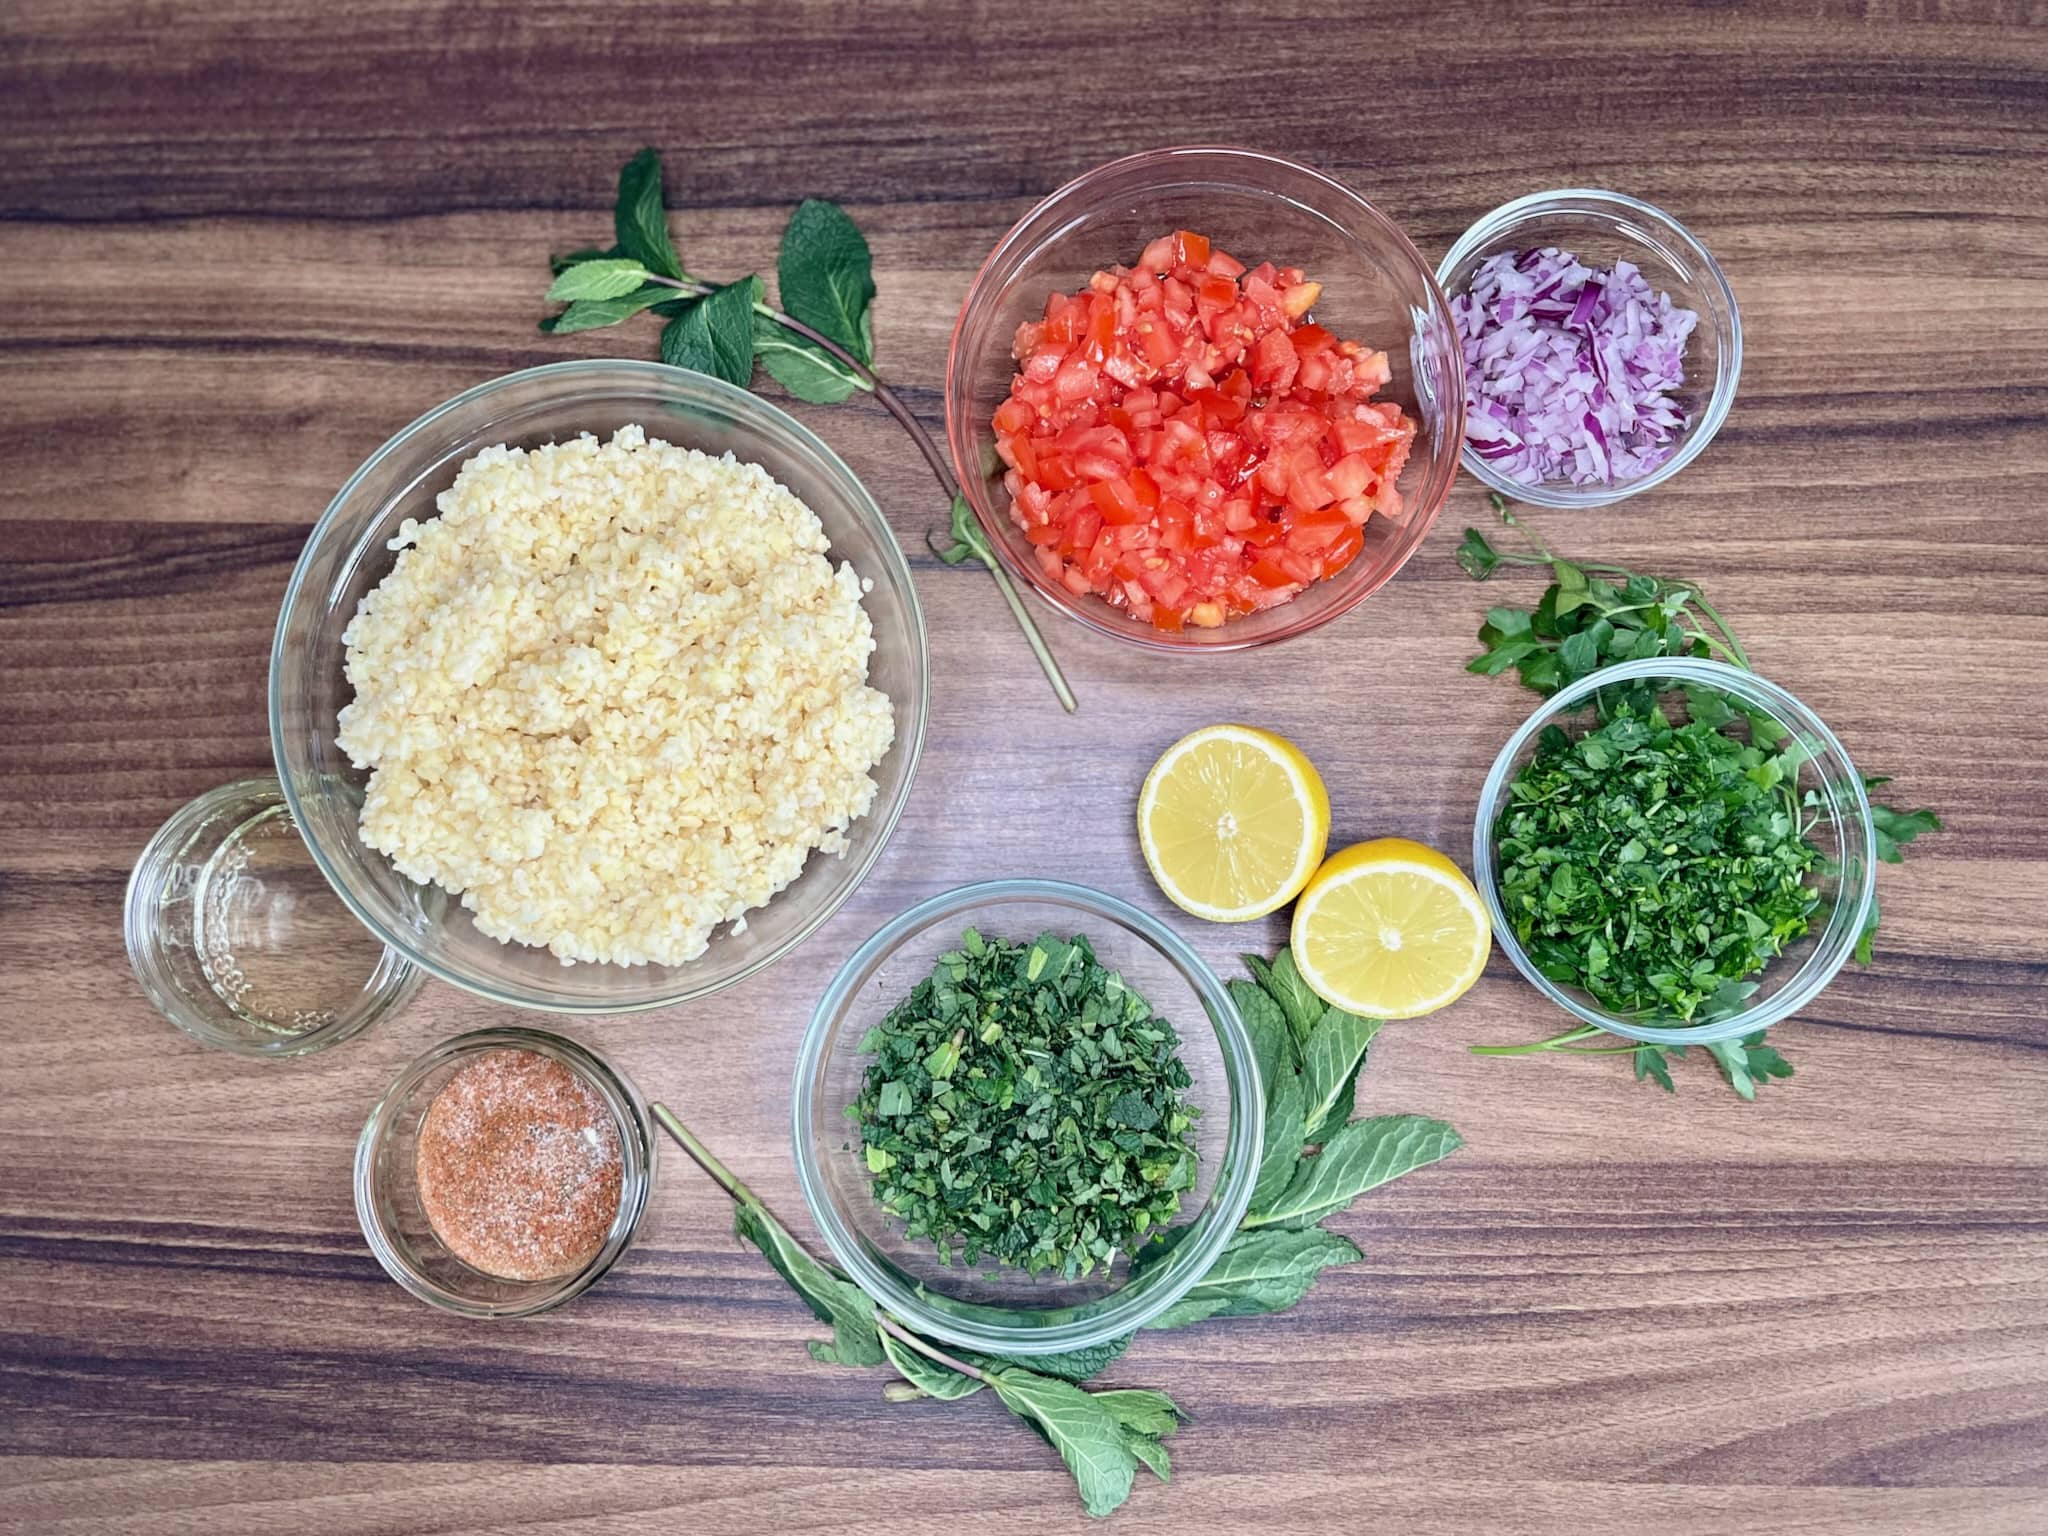 All the ingredients ready to make Tabbouleh